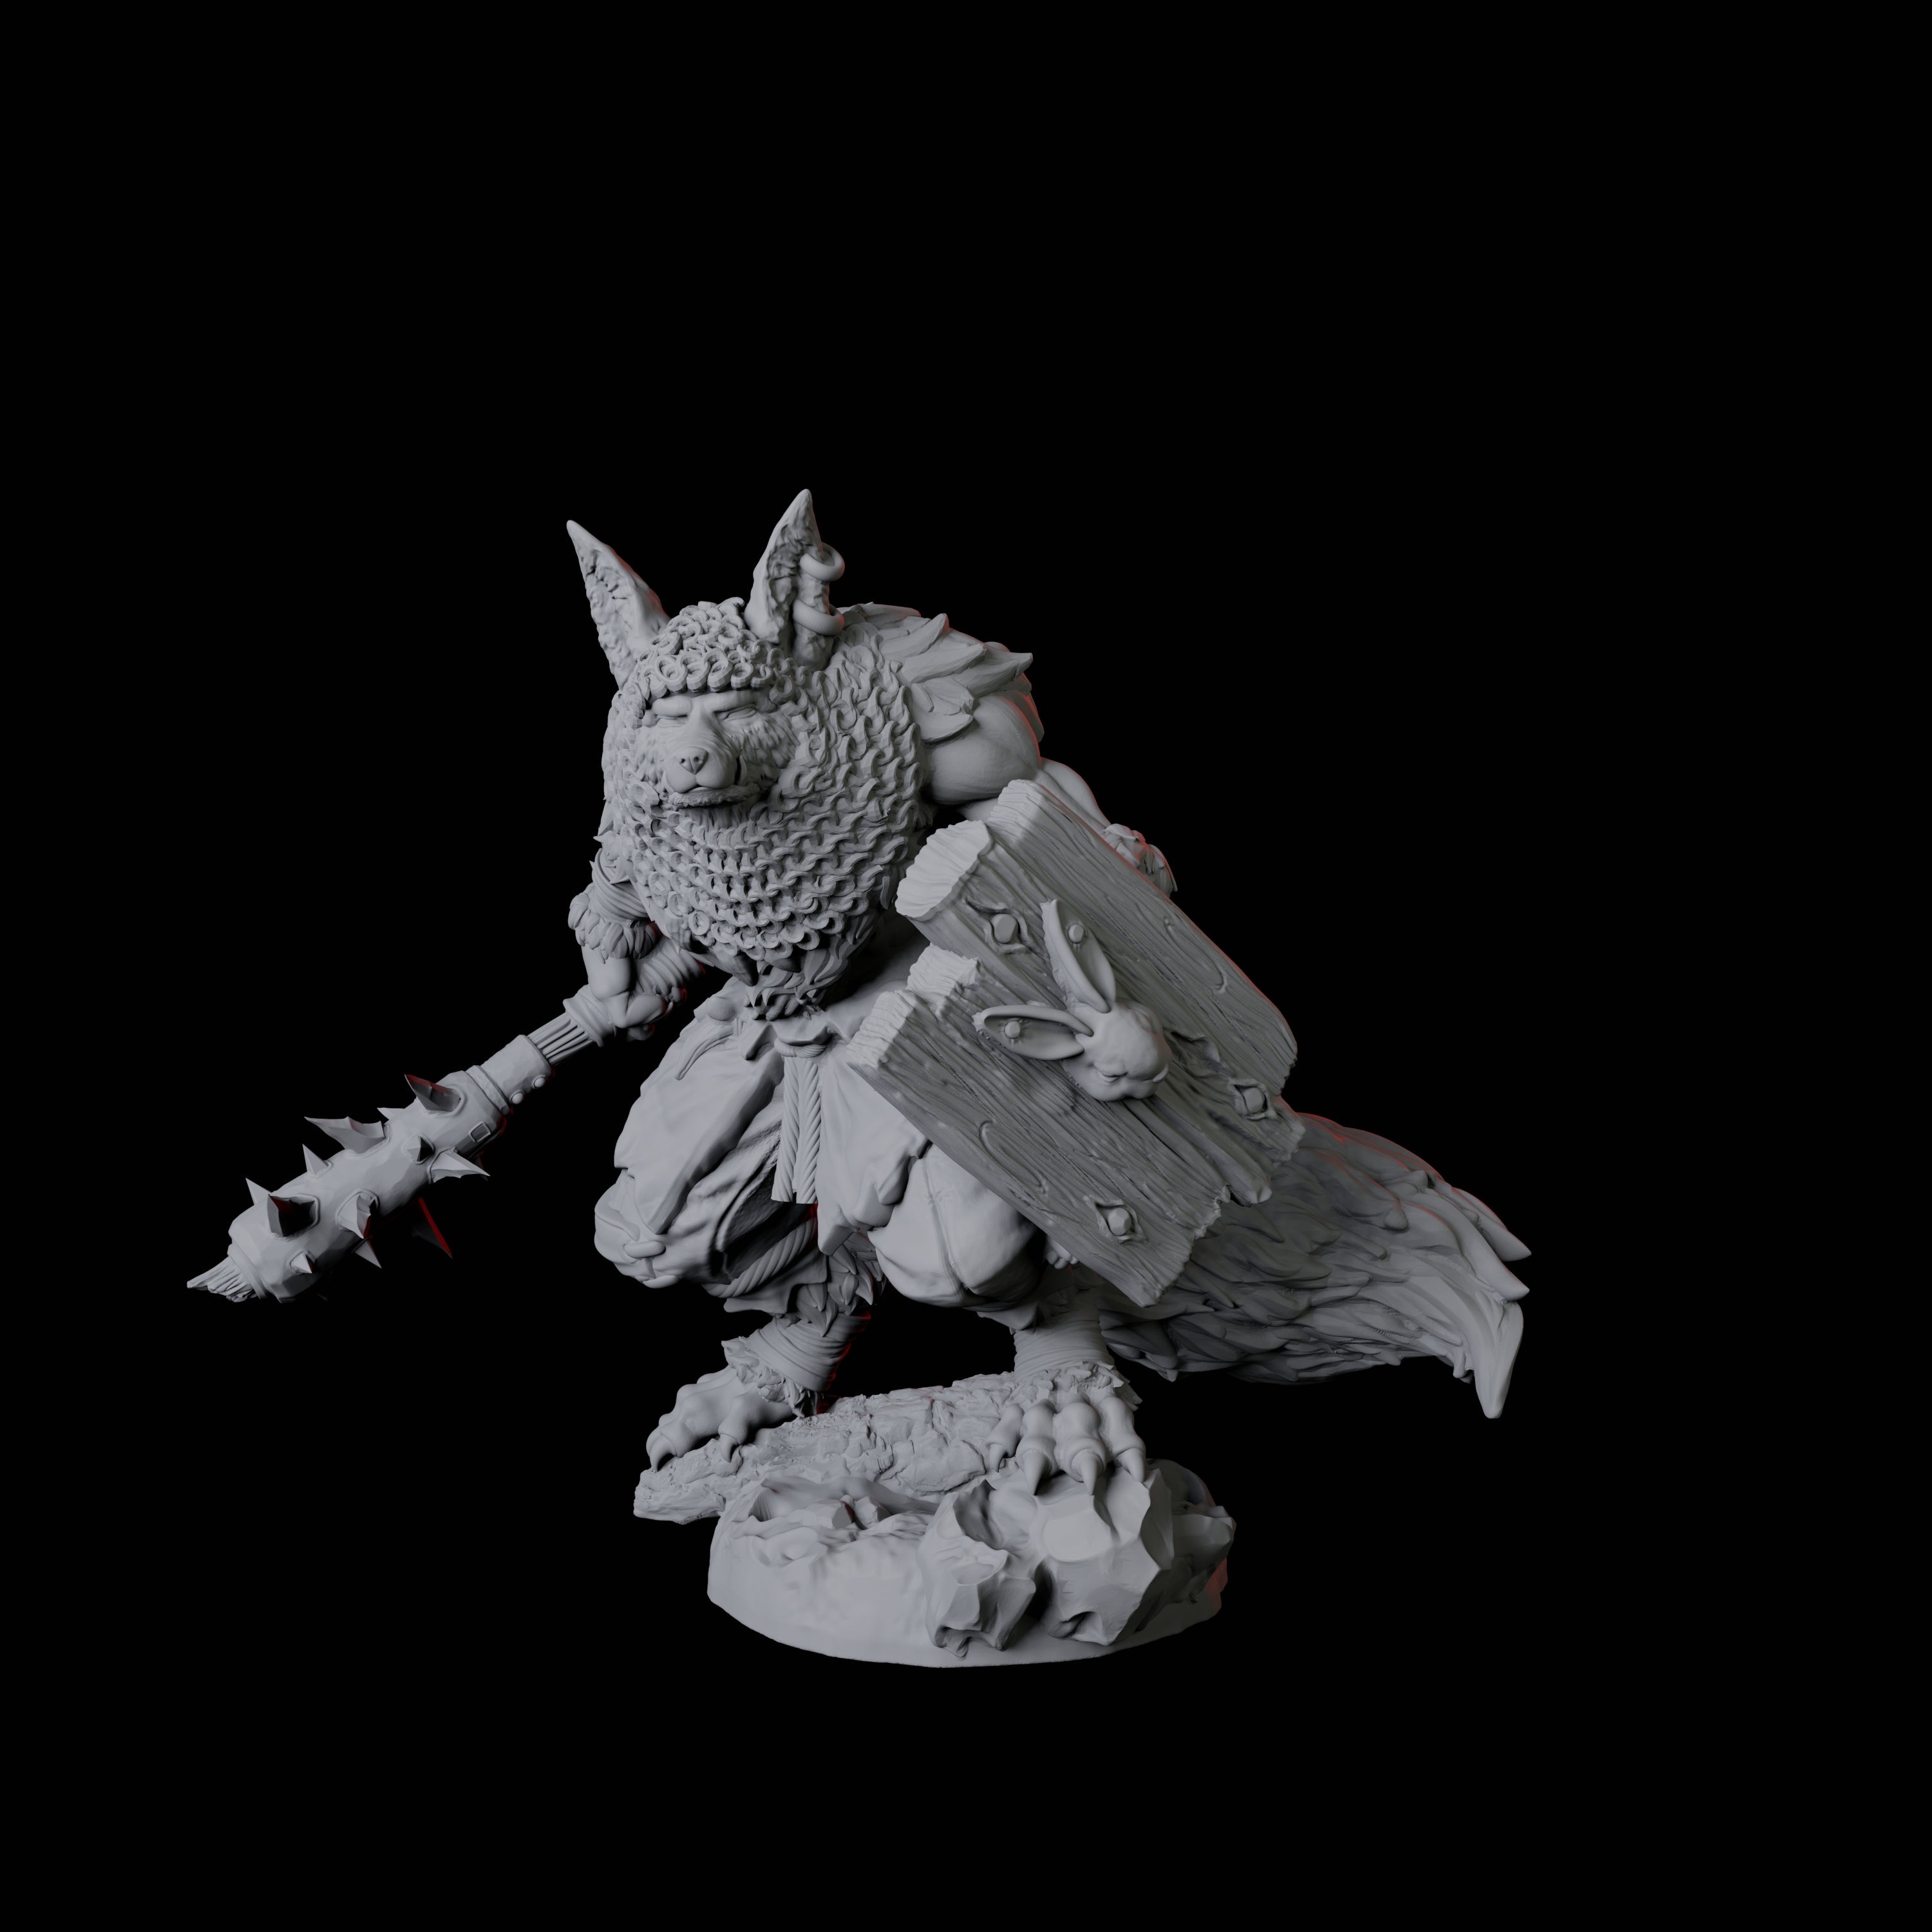 Cunning Kitsune Fighter B Miniature for Dungeons and Dragons, Pathfinder or other TTRPGs